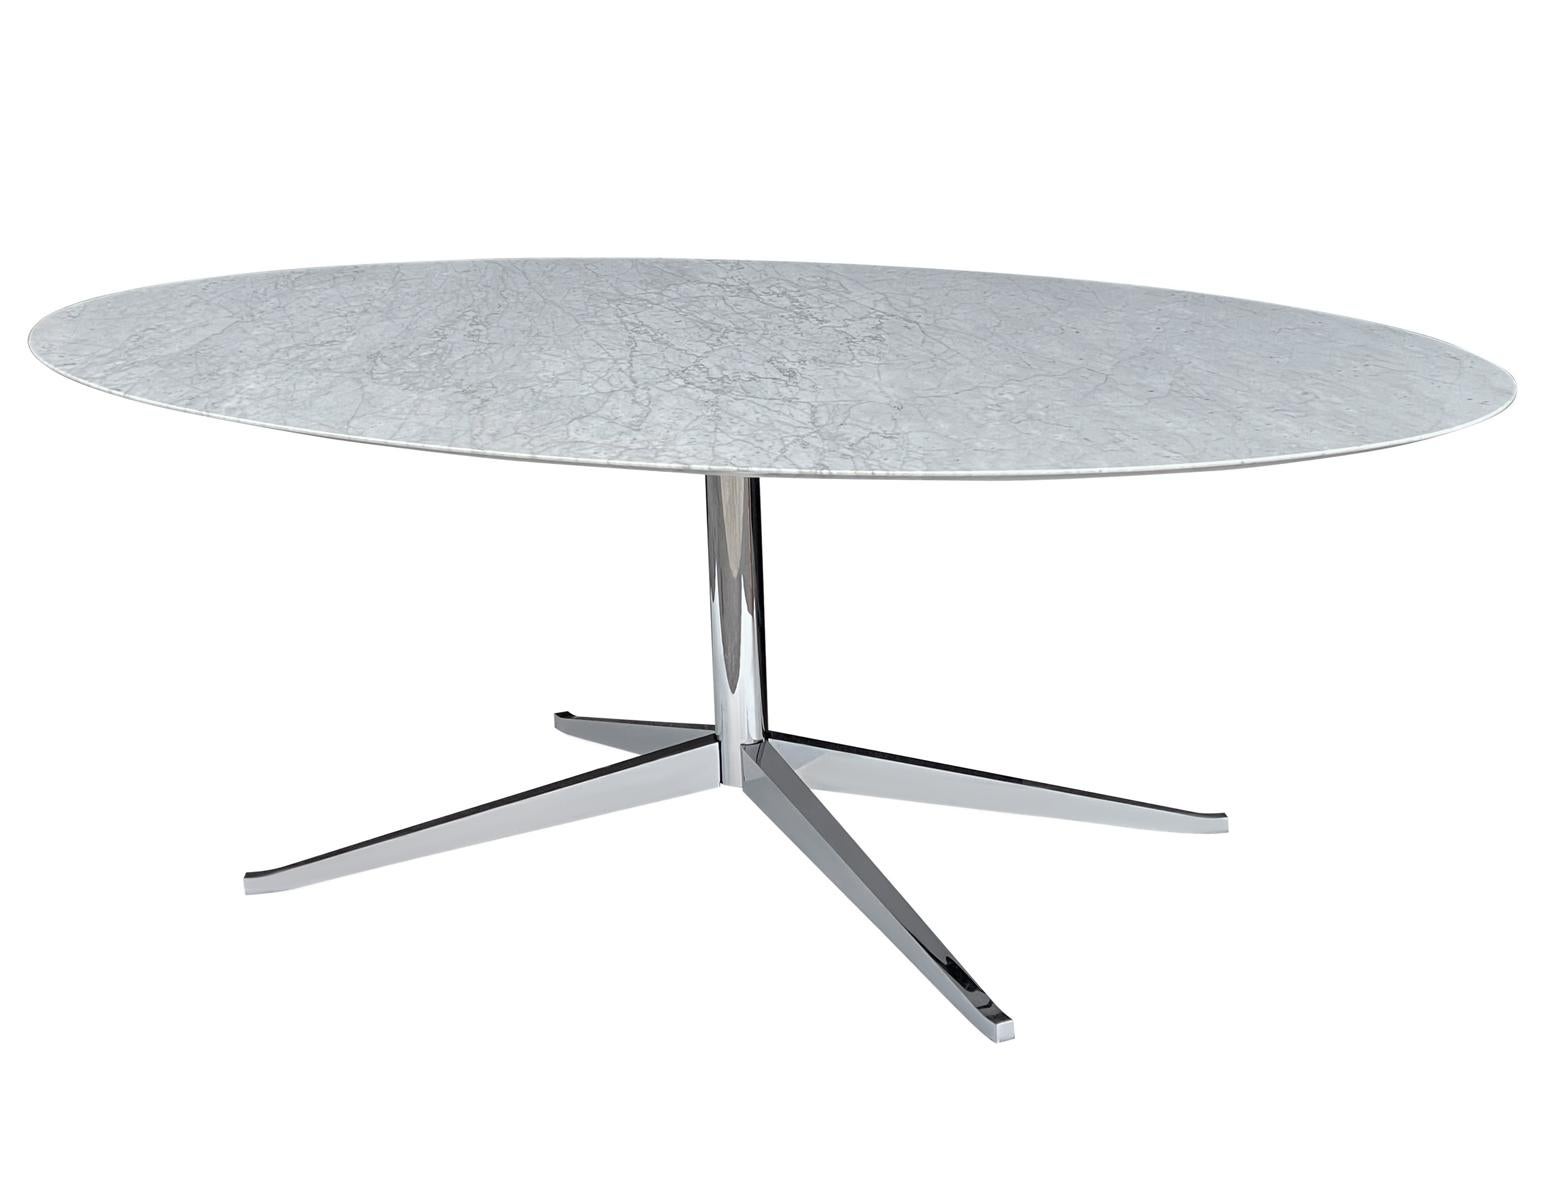 Chrome Mid-Century Modern Oval Dining Table or Desk by Florence Knoll in Carrara Marble For Sale